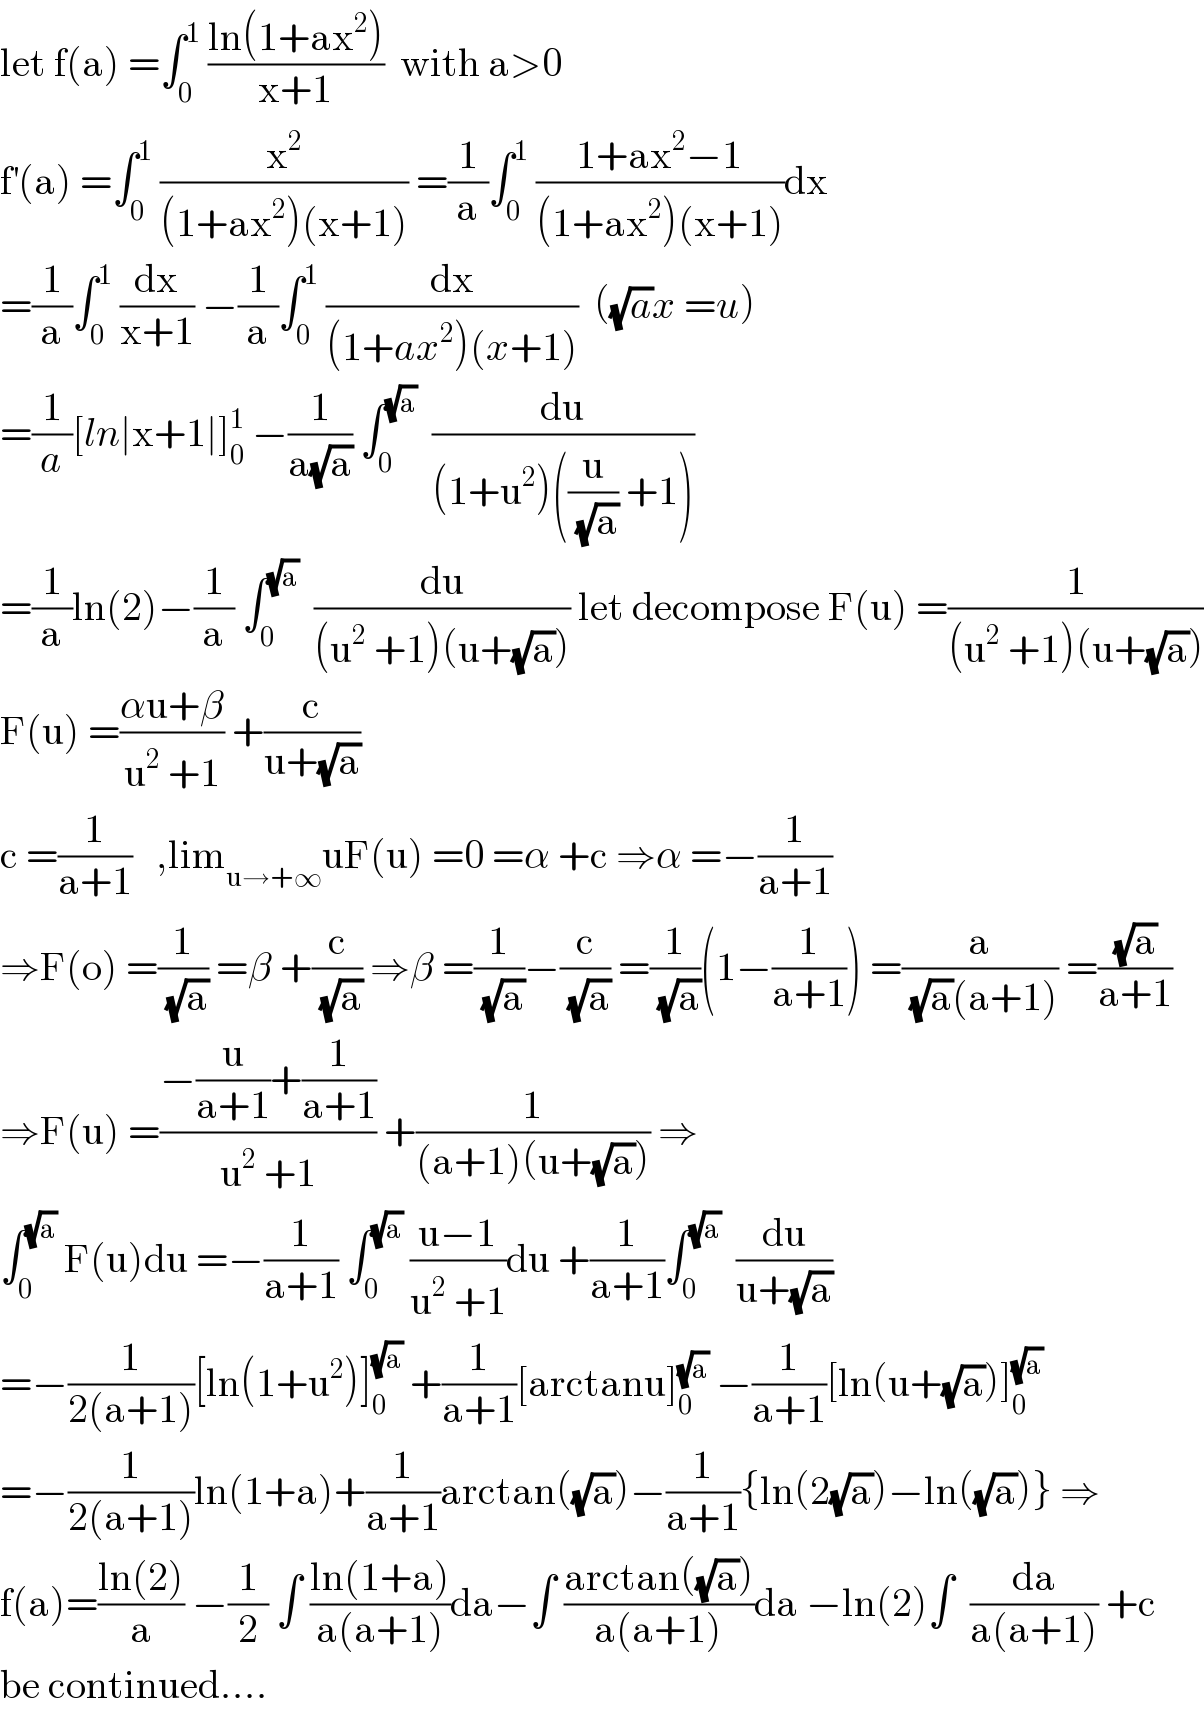 let f(a) =∫_0 ^1  ((ln(1+ax^2 ))/(x+1))  with a>0  f^′ (a) =∫_0 ^1  (x^2 /((1+ax^2 )(x+1))) =(1/a)∫_0 ^1  ((1+ax^2 −1)/((1+ax^2 )(x+1)))dx  =(1/a)∫_0 ^1  (dx/(x+1)) −(1/a)∫_0 ^1  (dx/((1+ax^2 )(x+1)))  ((√a)x =u)  =(1/a)[ln∣x+1∣]_0 ^1  −(1/(a(√a))) ∫_0 ^(√a)   (du/((1+u^2 )((u/(√a)) +1)))  =(1/a)ln(2)−(1/a) ∫_0 ^(√a)   (du/((u^2  +1)(u+(√a)))) let decompose F(u) =(1/((u^2  +1)(u+(√a))))  F(u) =((αu+β)/(u^2  +1)) +(c/(u+(√a)))  c =(1/(a+1))   ,lim_(u→+∞) uF(u) =0 =α +c ⇒α =−(1/(a+1))  ⇒F(o) =(1/(√a)) =β +(c/(√a)) ⇒β =(1/(√a))−(c/(√a)) =(1/(√a))(1−(1/(a+1))) =(a/((√a)(a+1))) =((√a)/(a+1))  ⇒F(u) =((−(u/(a+1))+(1/(a+1)))/(u^2  +1)) +(1/((a+1)(u+(√a)))) ⇒  ∫_0 ^(√a)  F(u)du =−(1/(a+1)) ∫_0 ^(√a)  ((u−1)/(u^2  +1))du +(1/(a+1))∫_0 ^(√a)   (du/(u+(√a)))  =−(1/(2(a+1)))[ln(1+u^2 )]_0 ^(√a)  +(1/(a+1))[arctanu]_0 ^(√a)  −(1/(a+1))[ln(u+(√a))]_0 ^(√a)   =−(1/(2(a+1)))ln(1+a)+(1/(a+1))arctan((√a))−(1/(a+1)){ln(2(√a))−ln((√a))} ⇒  f(a)=((ln(2))/a) −(1/2) ∫ ((ln(1+a))/(a(a+1)))da−∫ ((arctan((√a)))/(a(a+1)))da −ln(2)∫  (da/(a(a+1))) +c  be continued....  